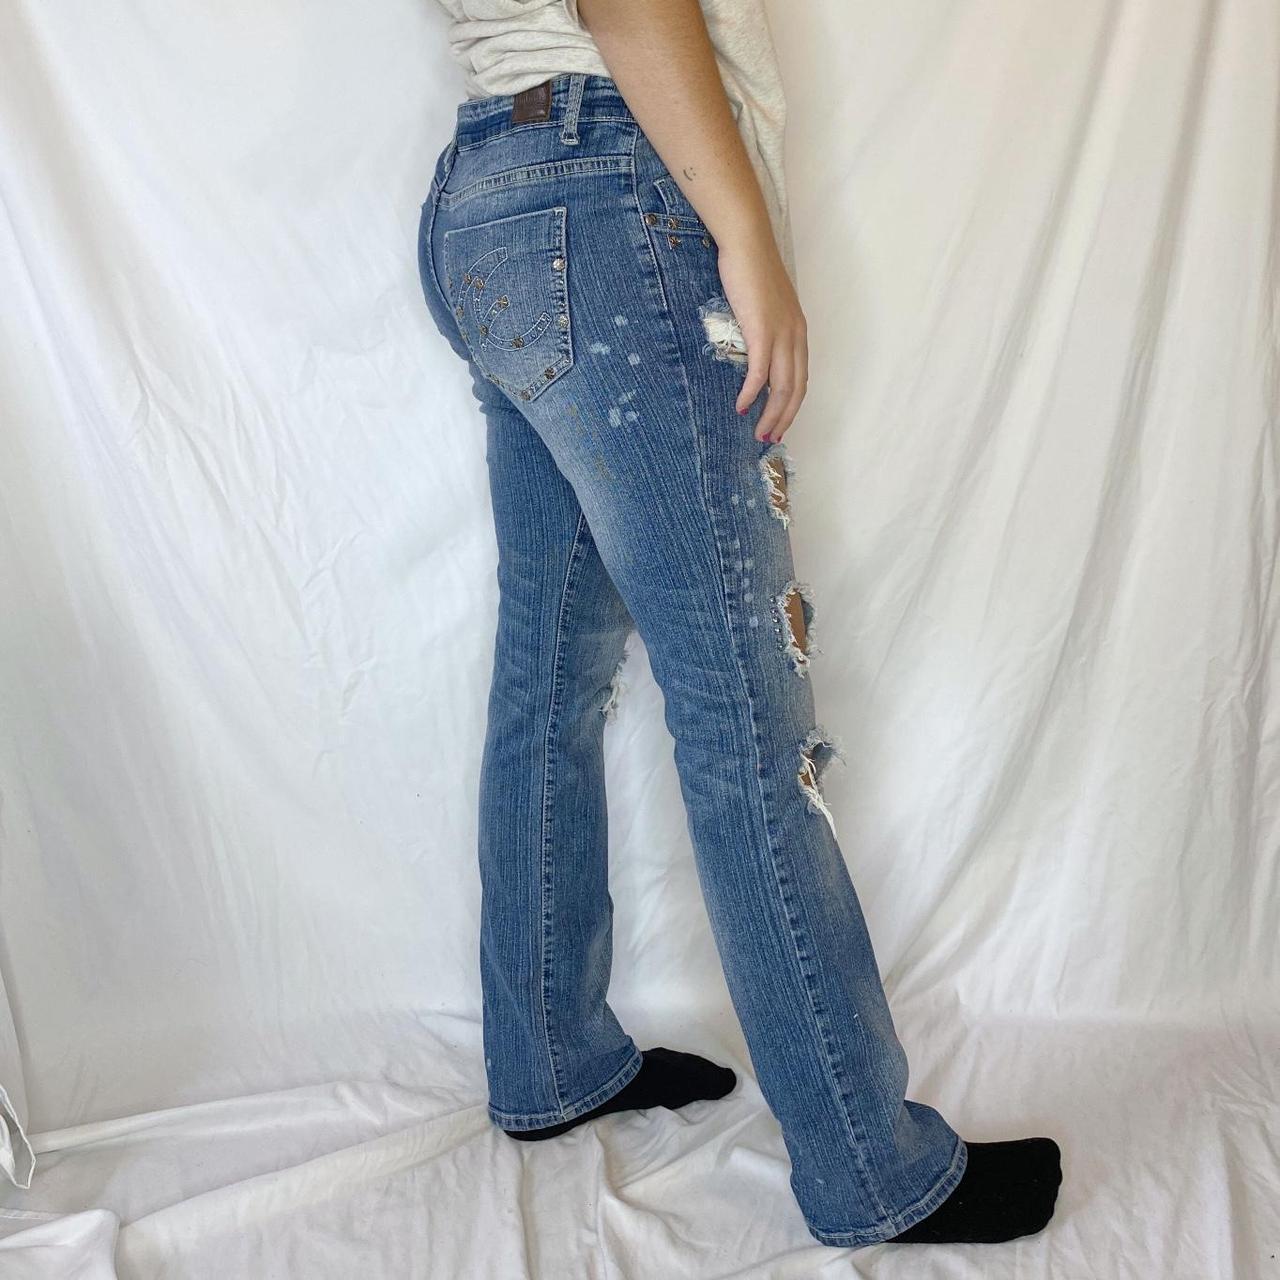 Product Image 4 - cut out low rise jeans

these